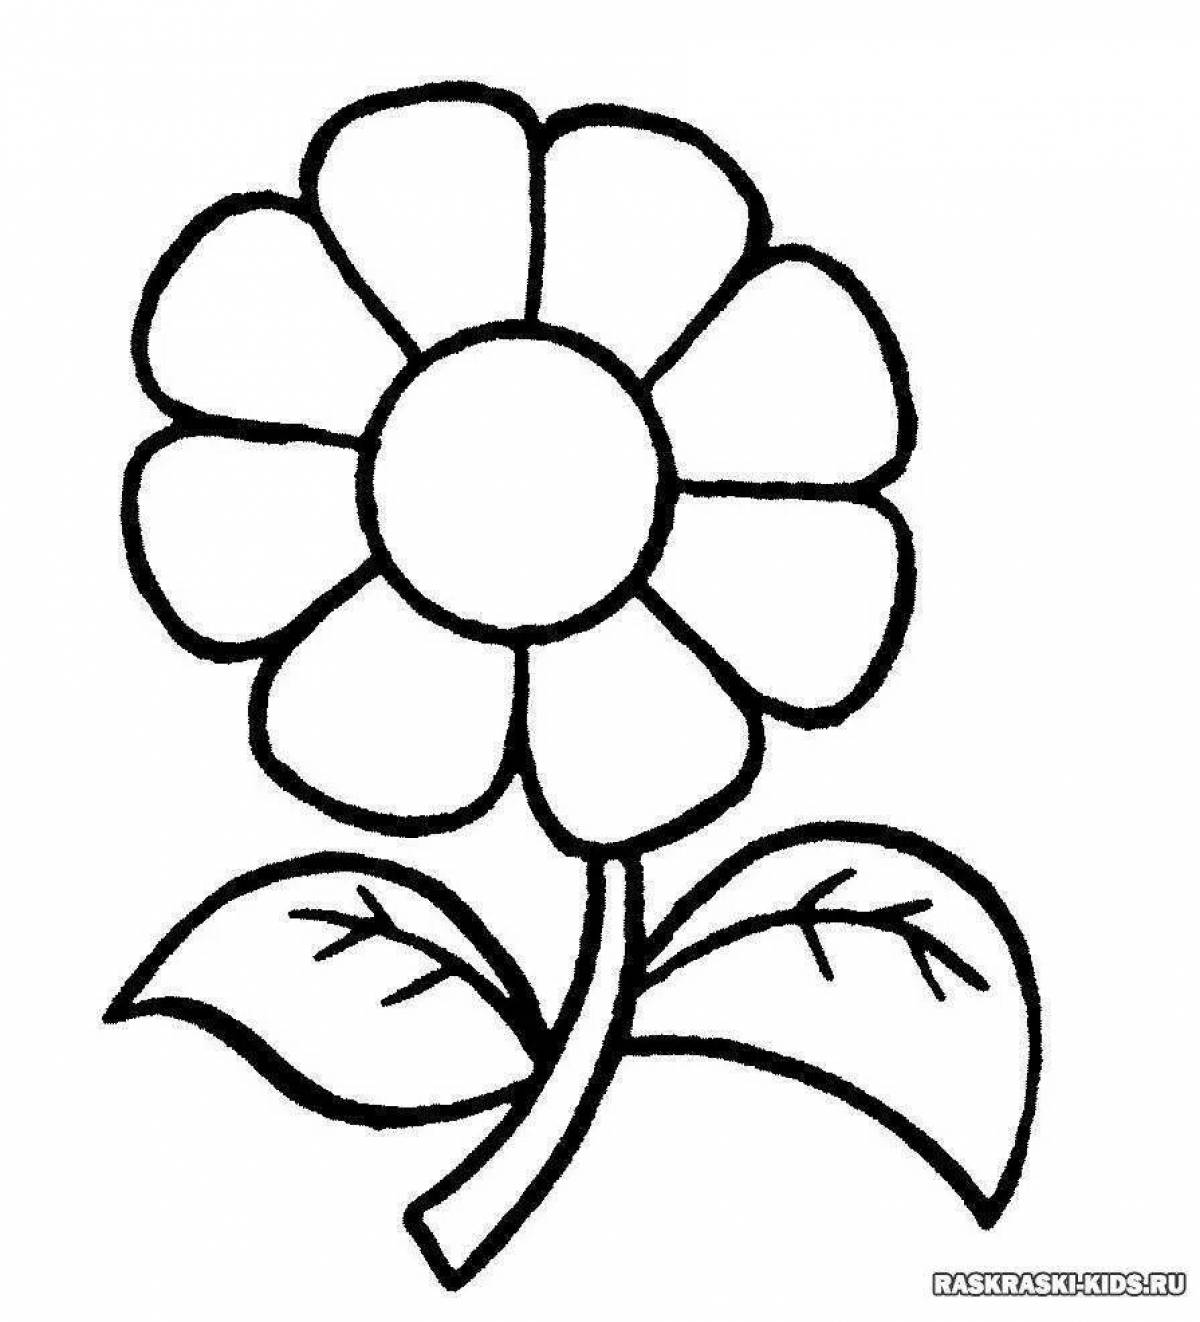 Bright daisy coloring page